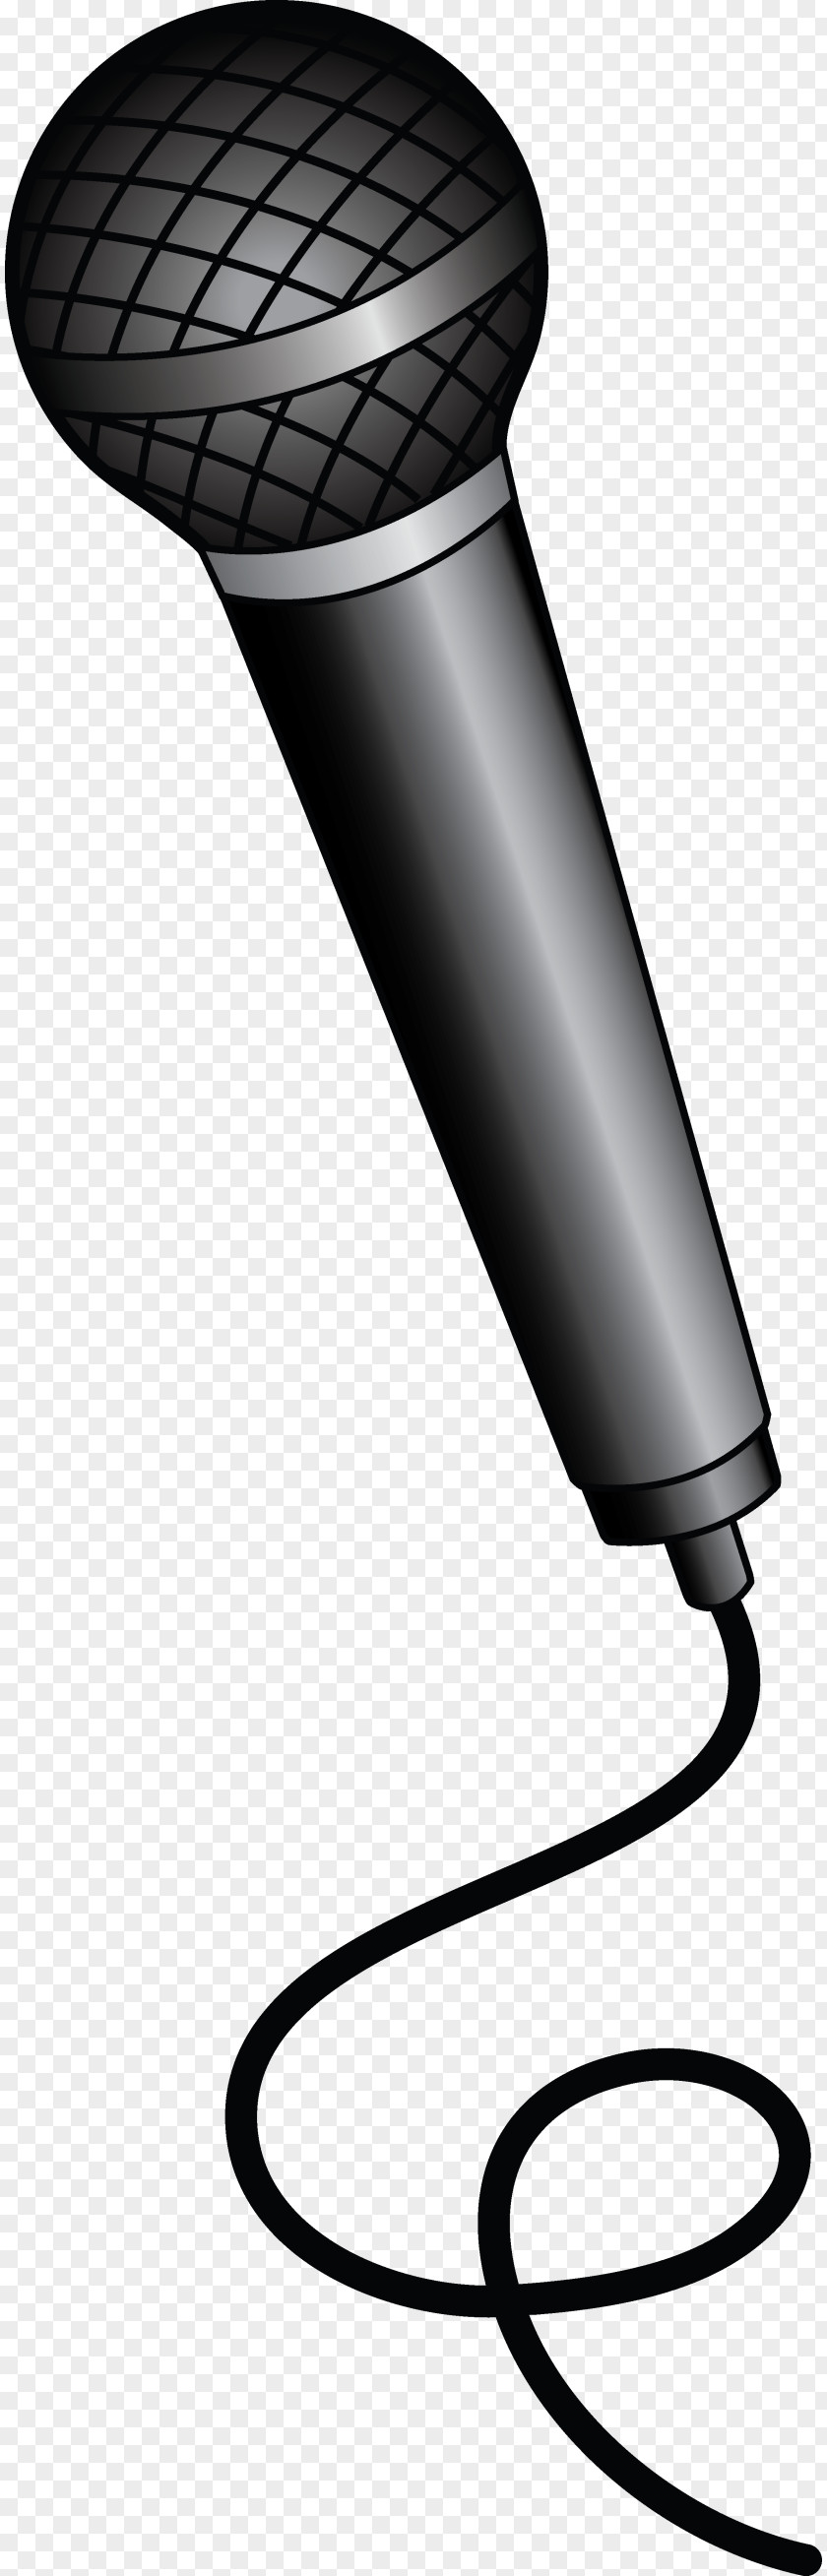 Whisk Microphone Coloring Book Drawing Clip Art PNG